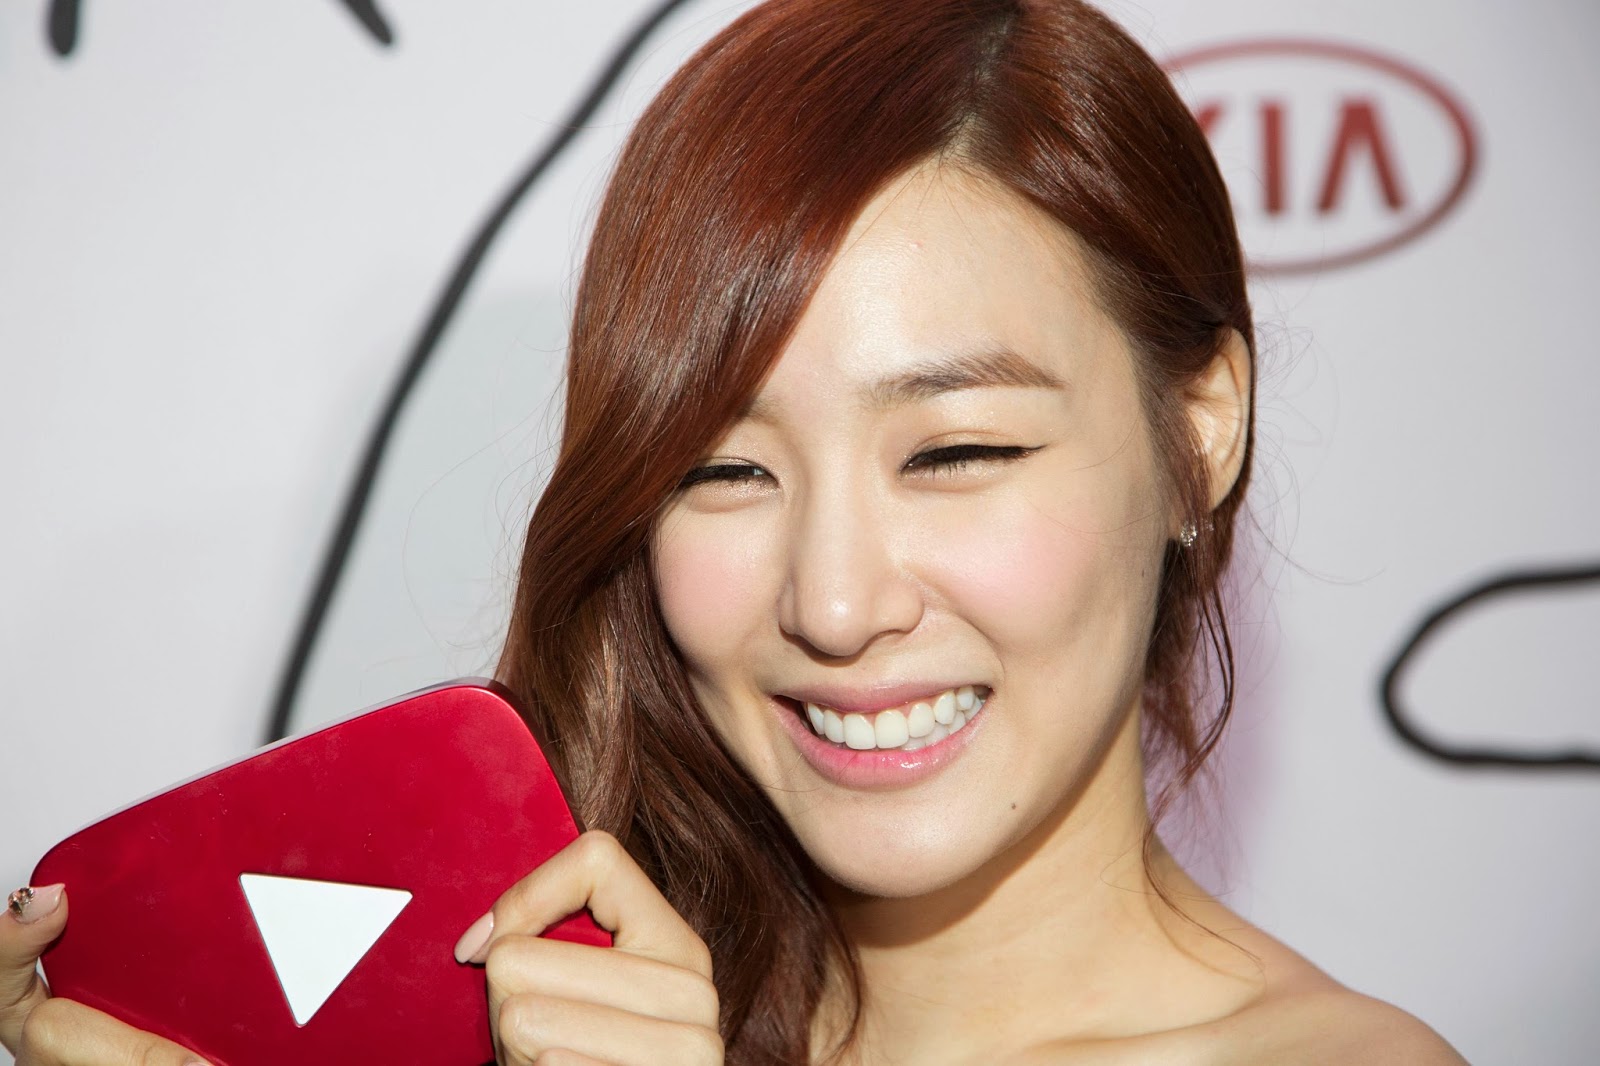 [Pictures] 131104 SNSD Tiffany at 2013 Youtube Music Awards ...